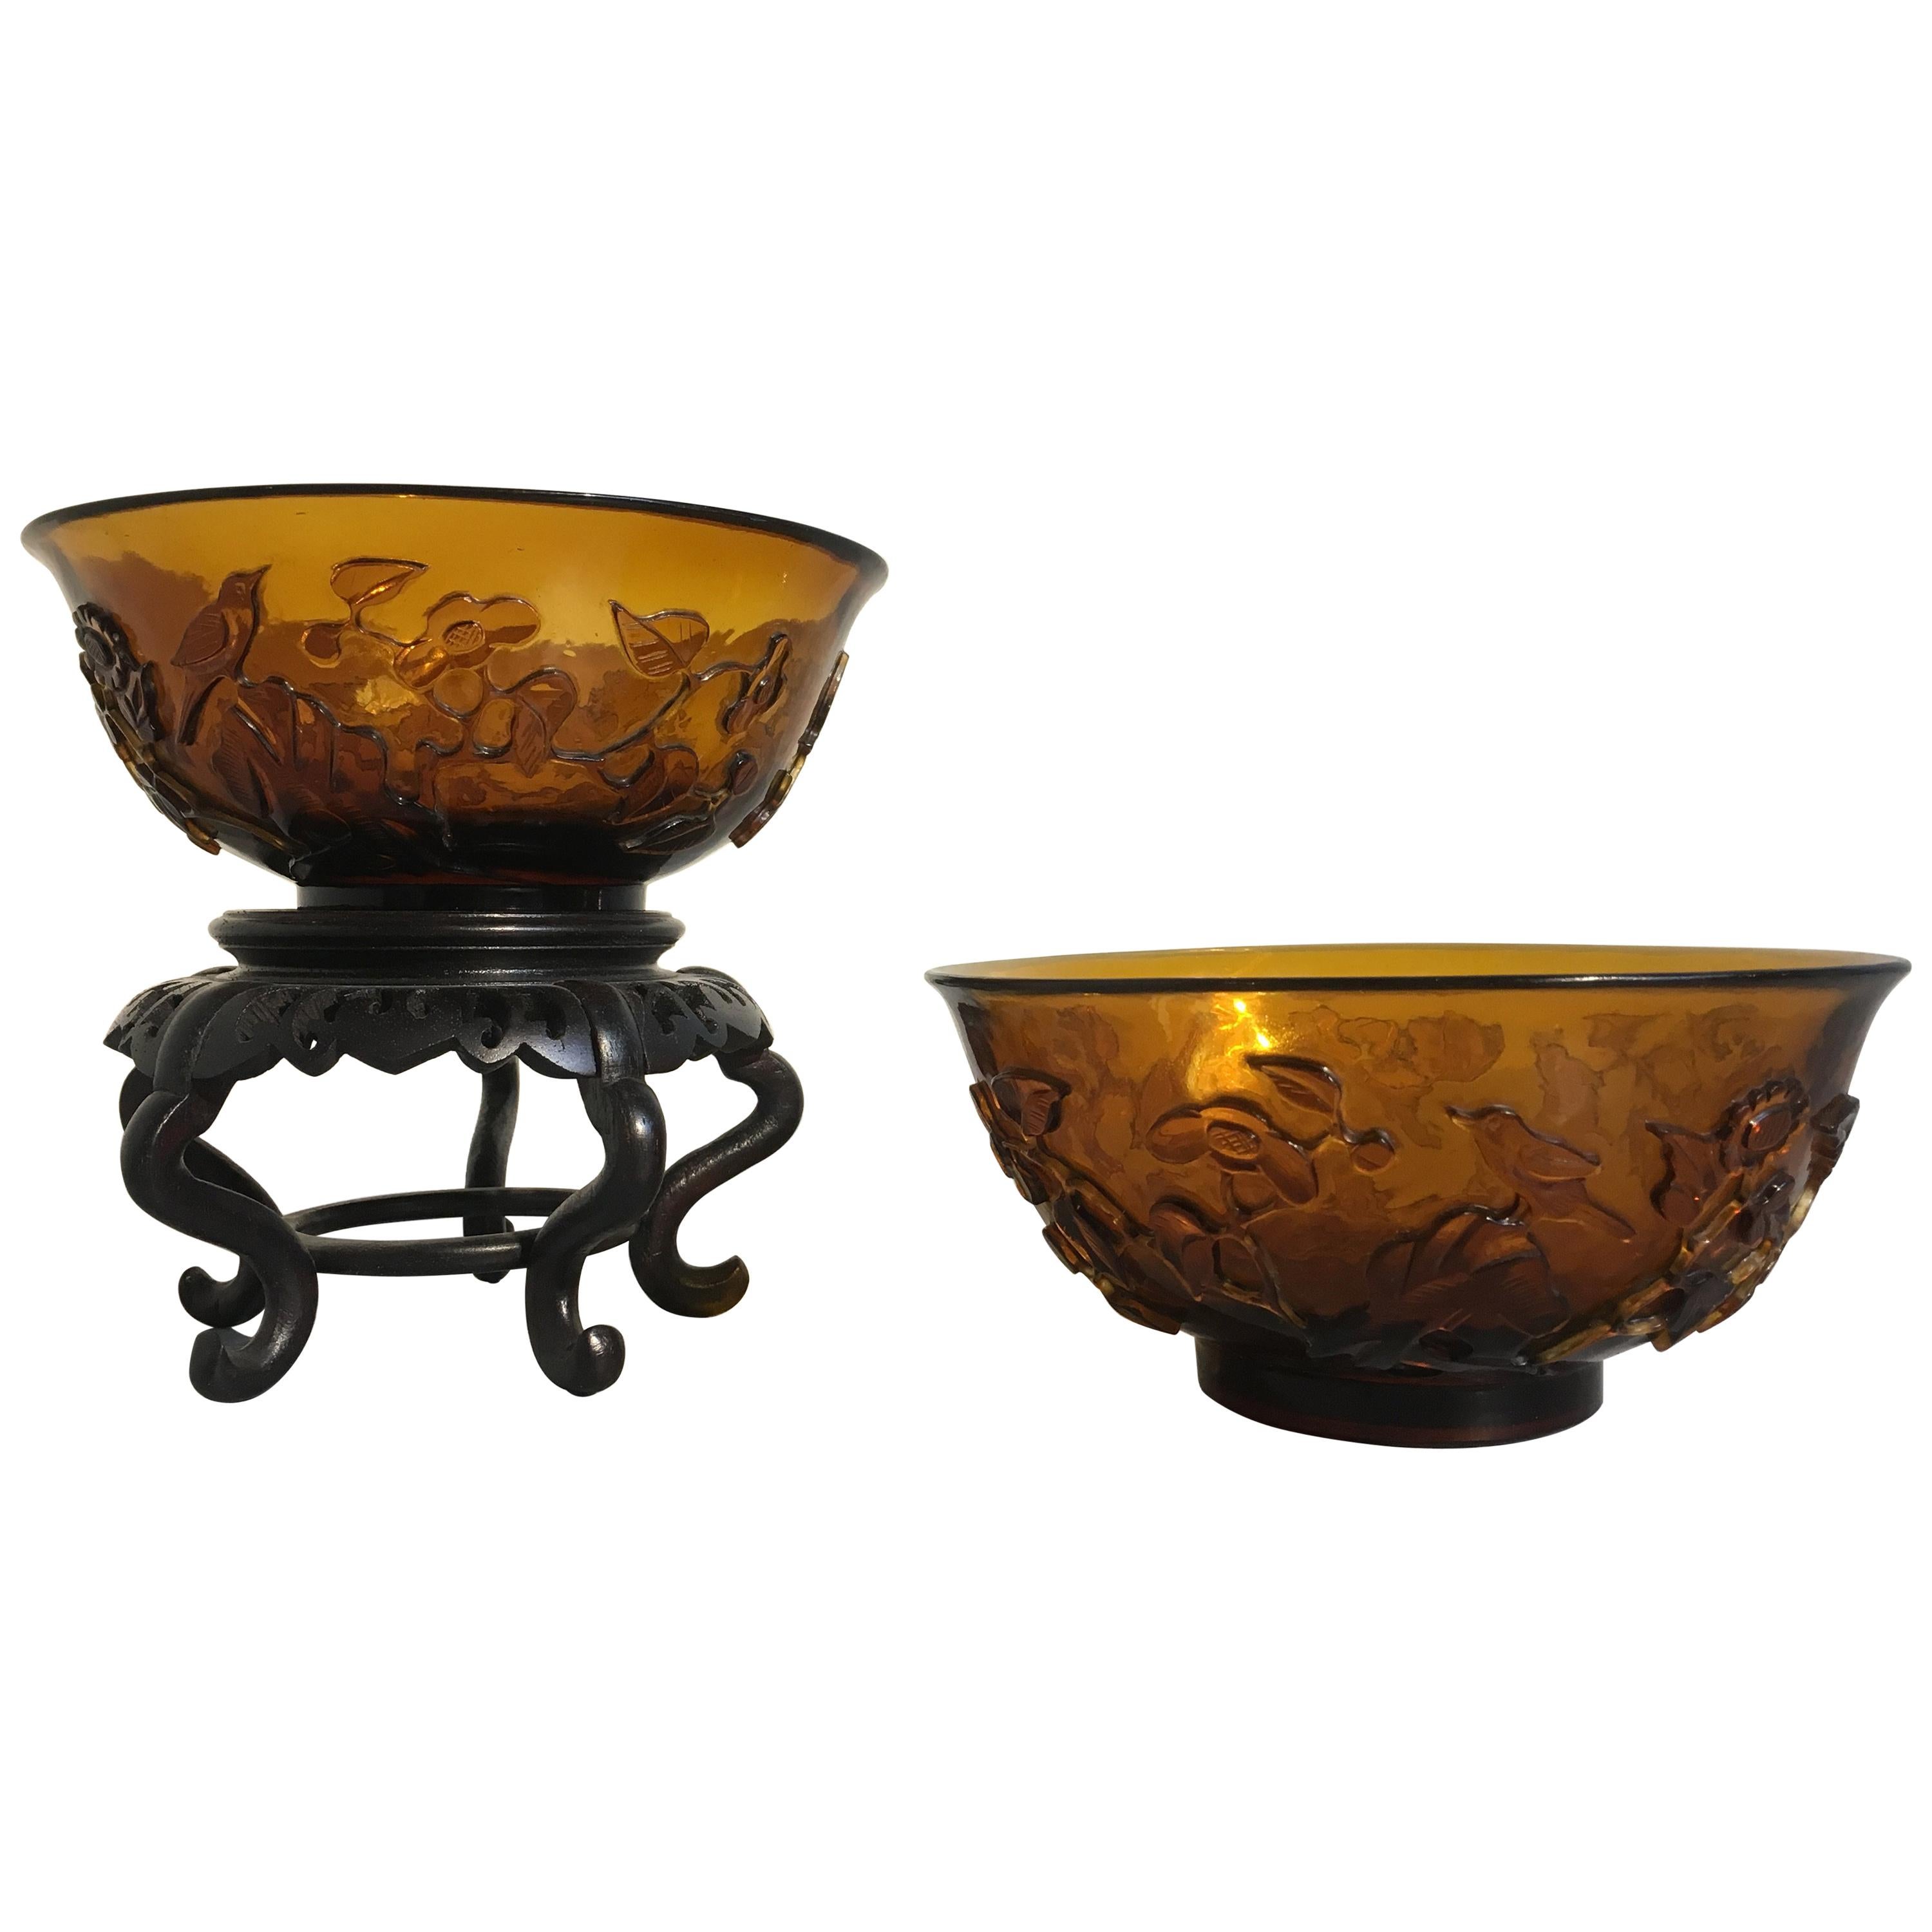 Pair of Chinese Amber Peking Glass Carved Bowls, Qing Dynasty, Late 19th Century